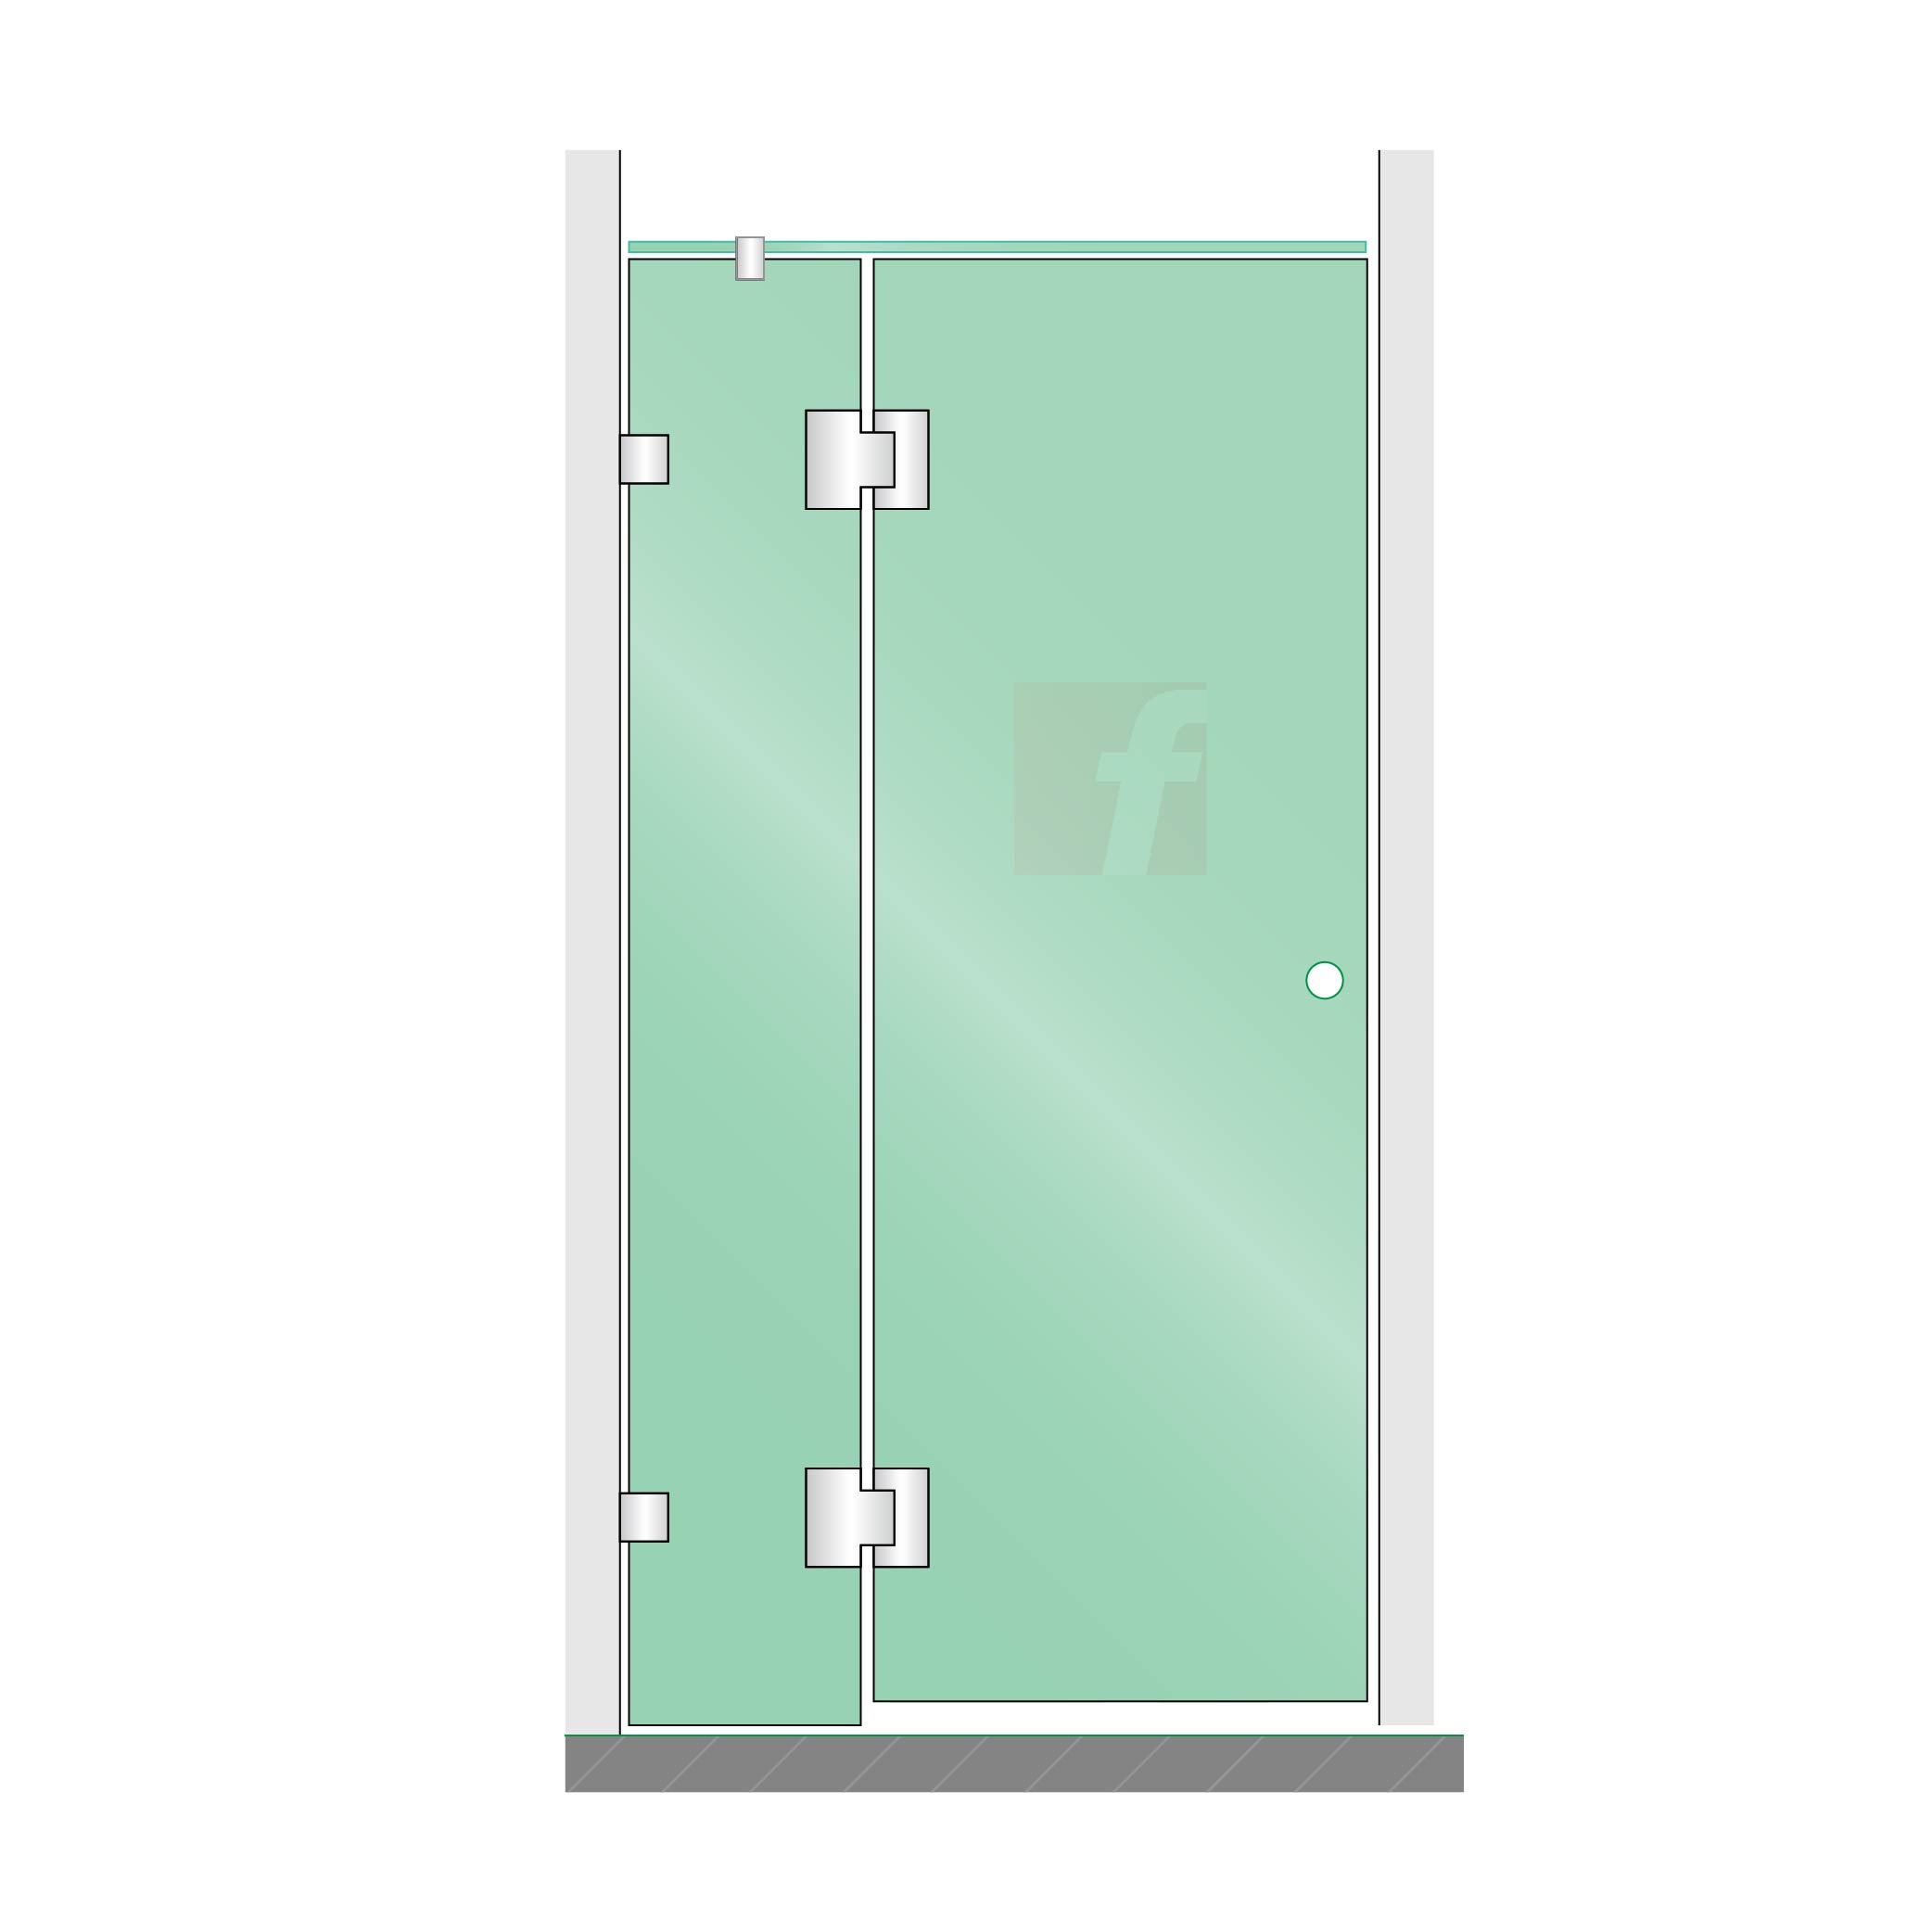 2 PANEL A (IN-LINE) WITH BRUSHED NICKEL HARDWARE